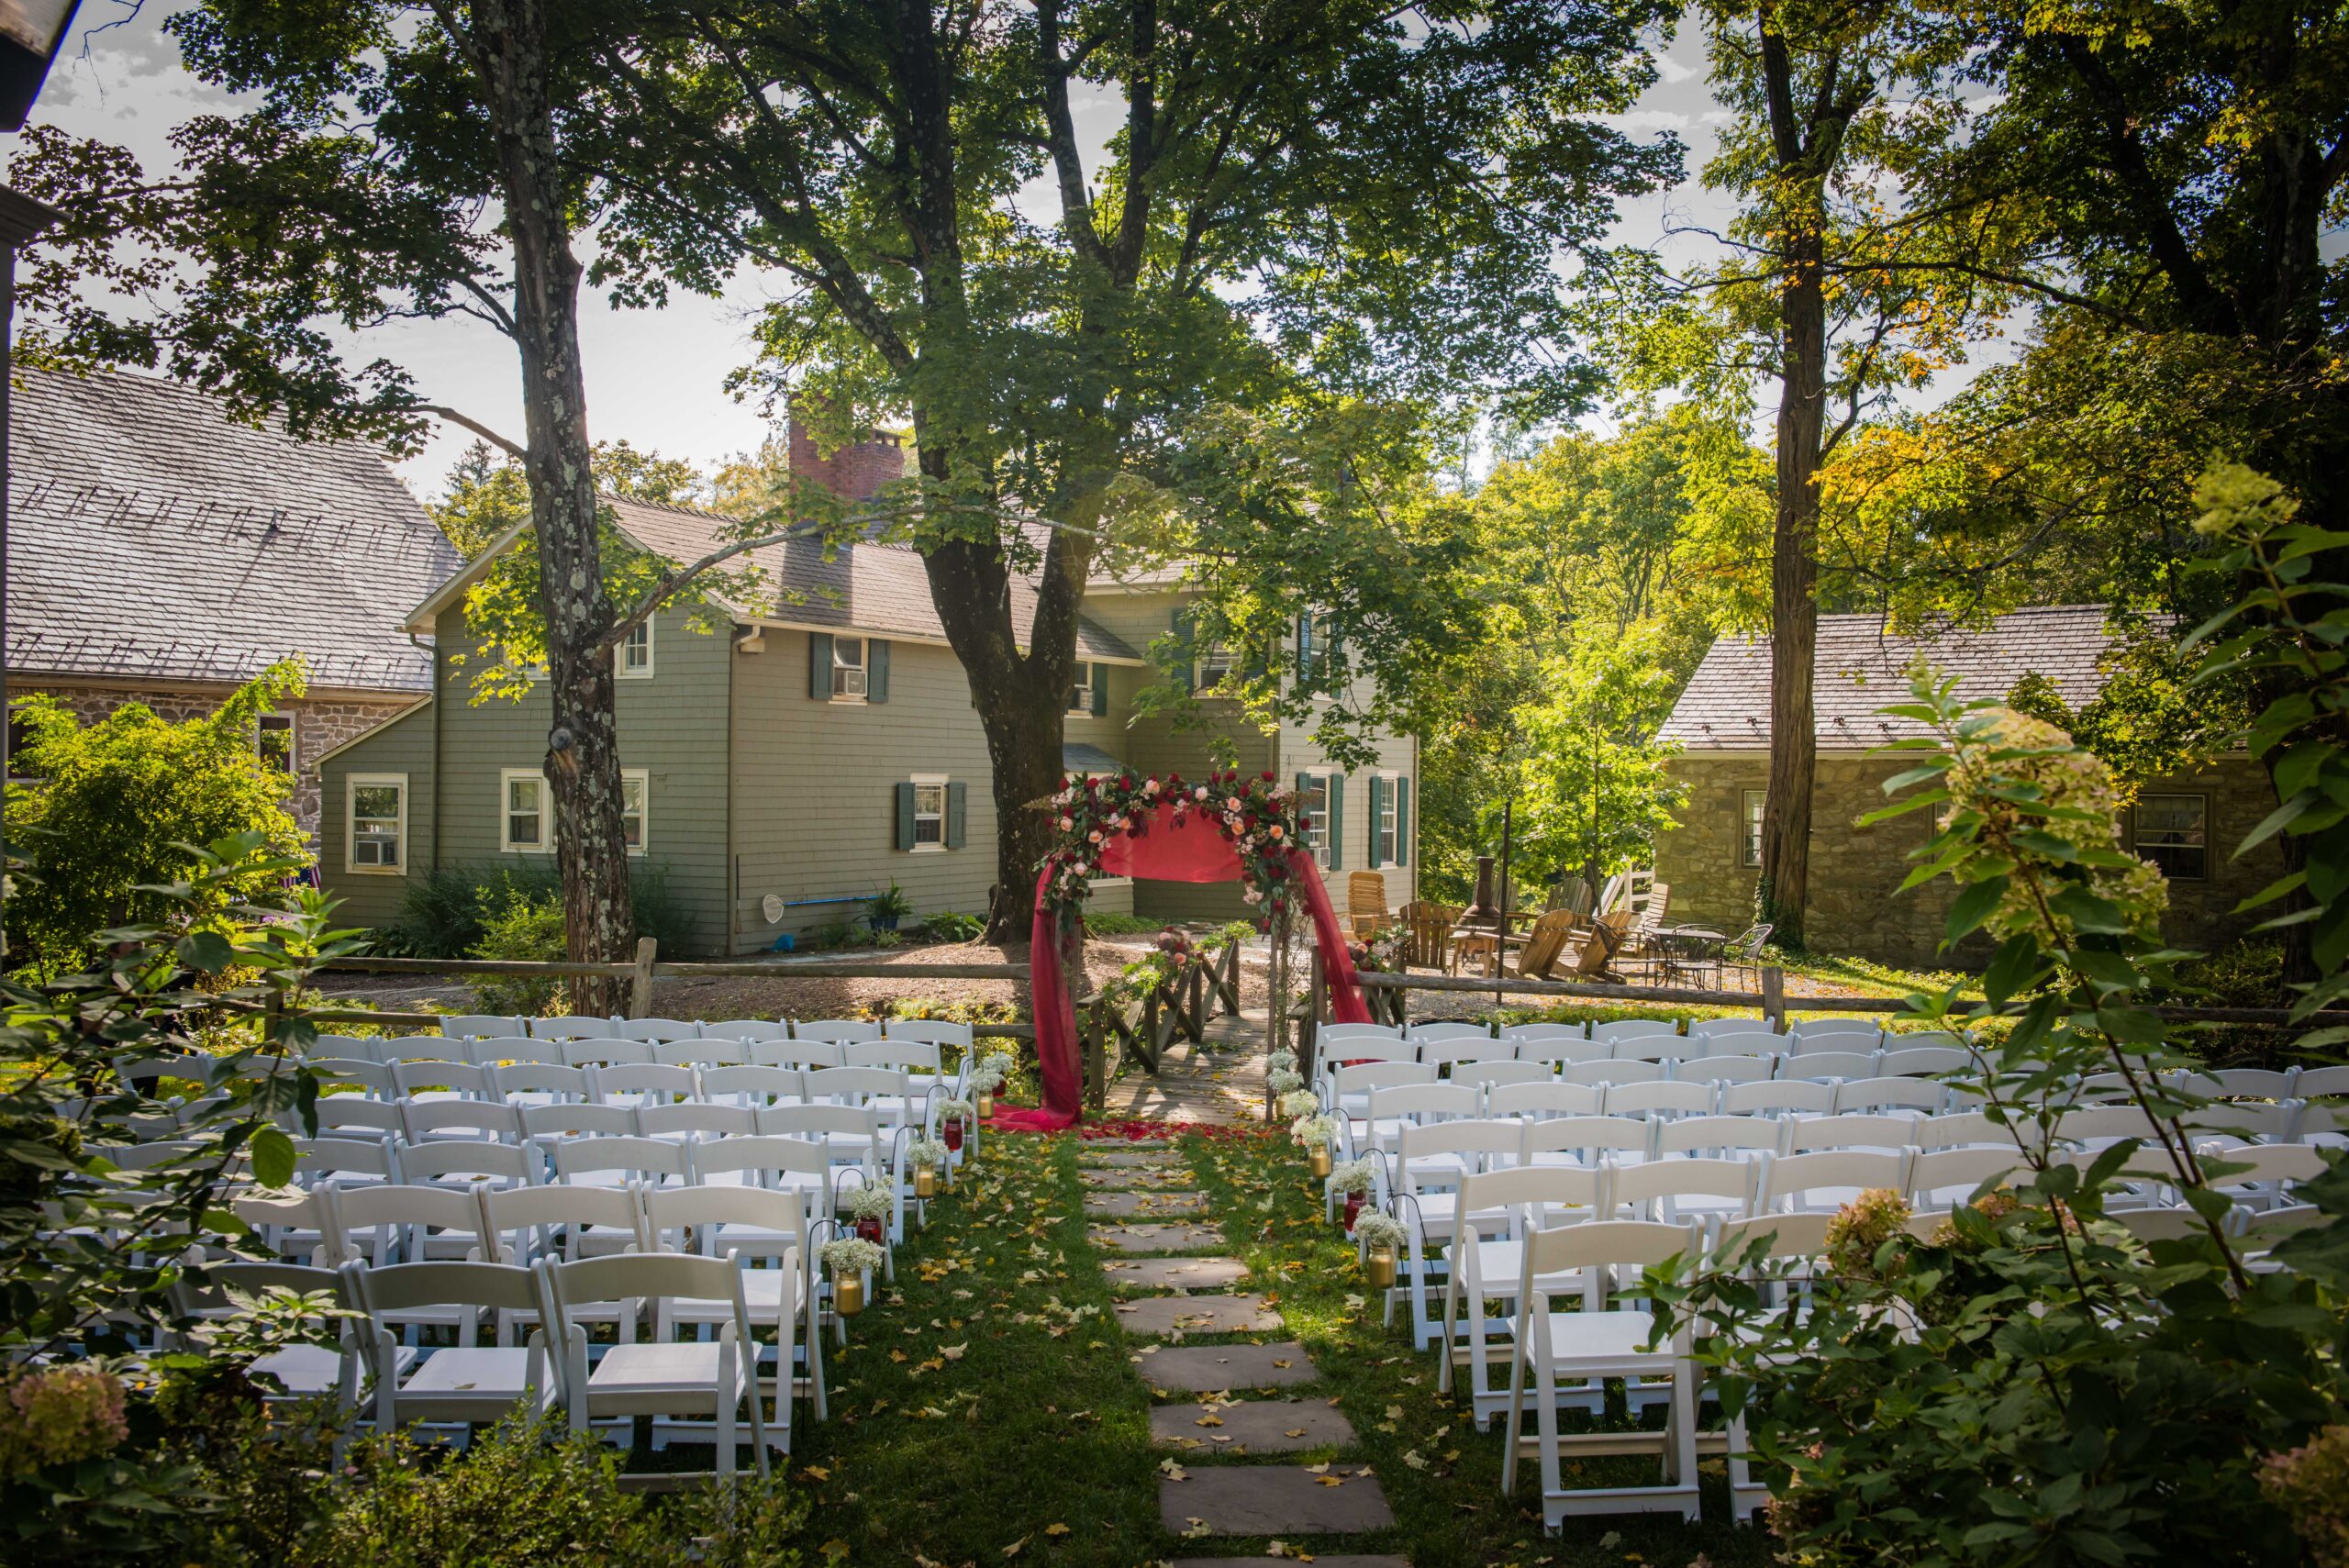 Inn at Millrace Pond, Hope, NJ - Wedding Videography and Photography